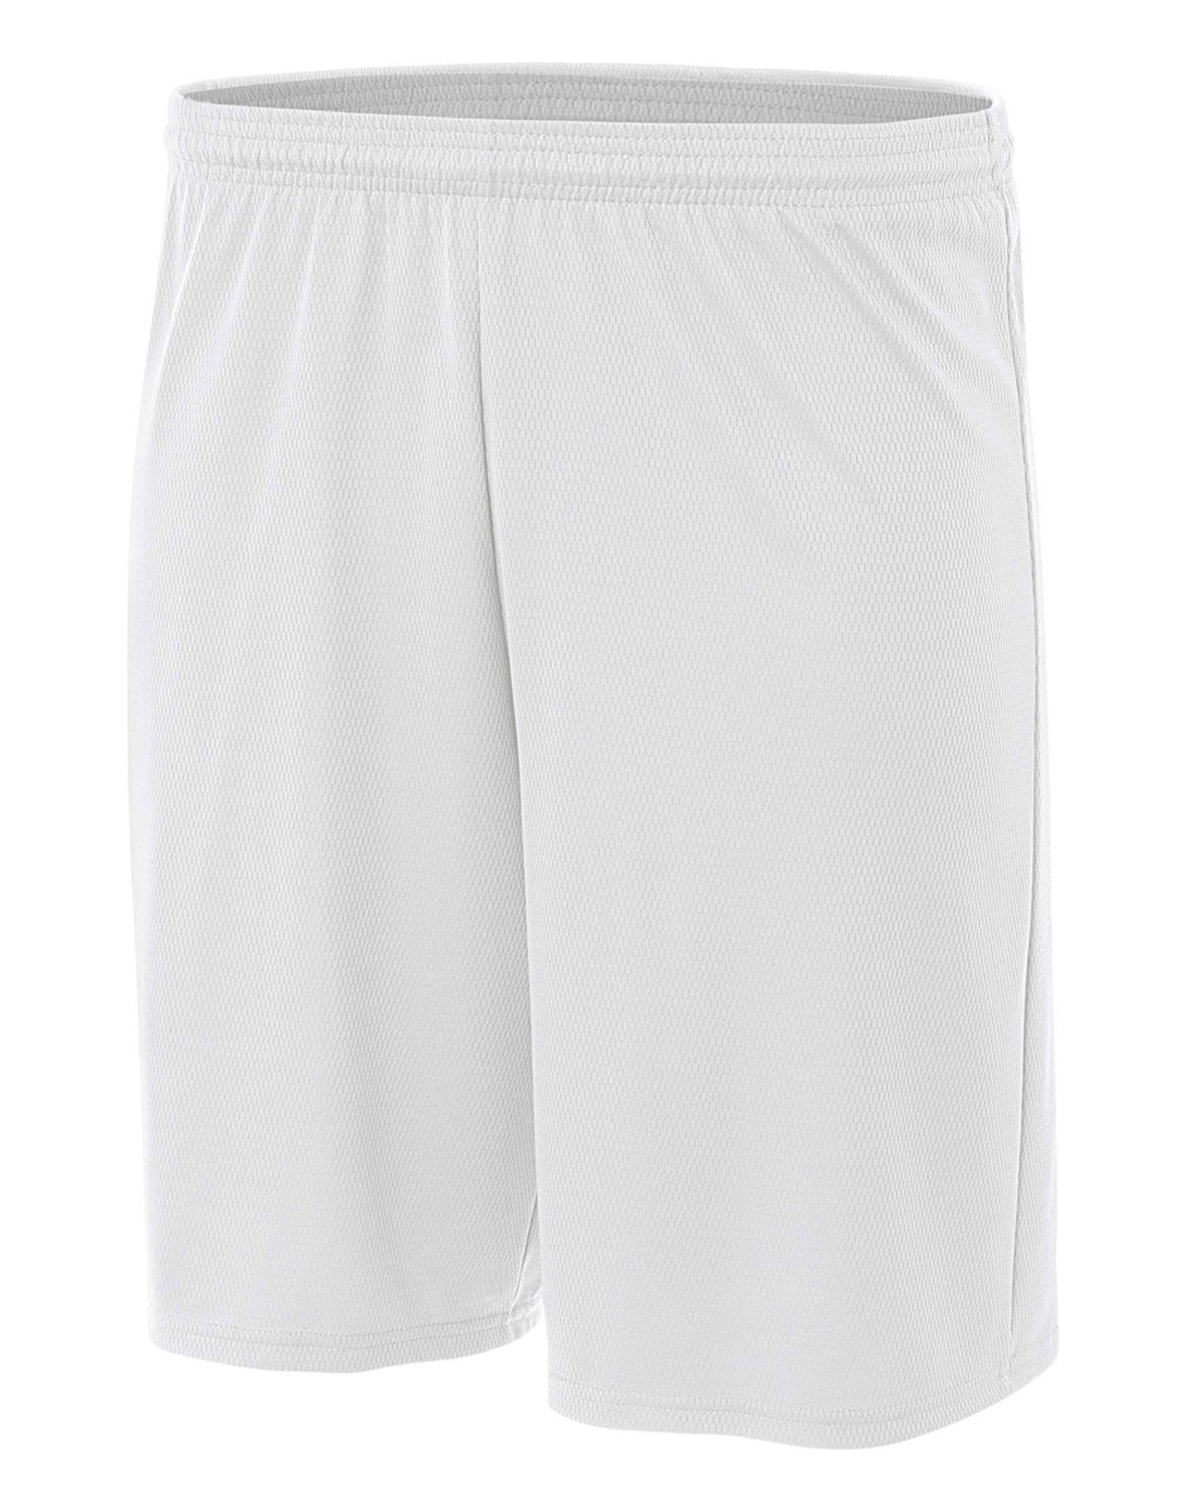 Front view of Youth Cooling Performance Power Mesh Practice Short